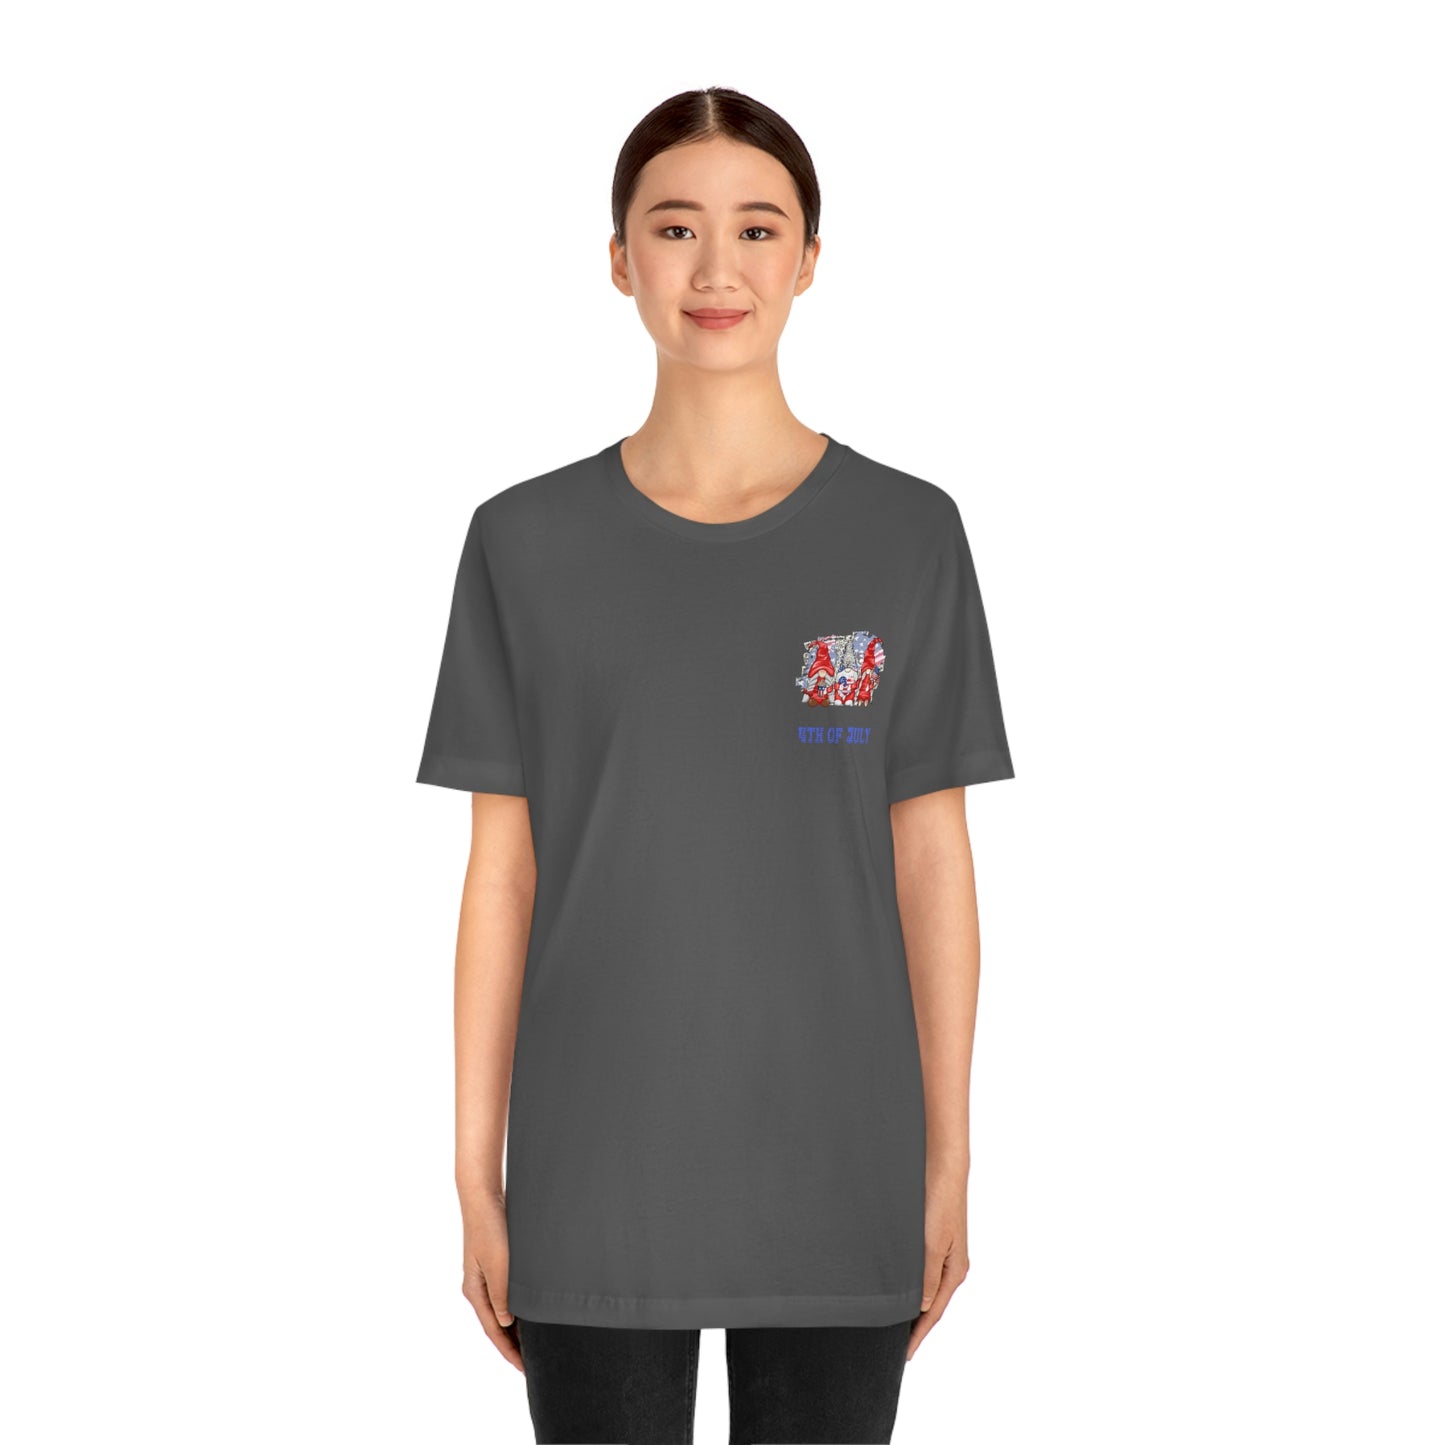 4th of July, America's Day, USA, God Bless America,  Short Sleeve Tee